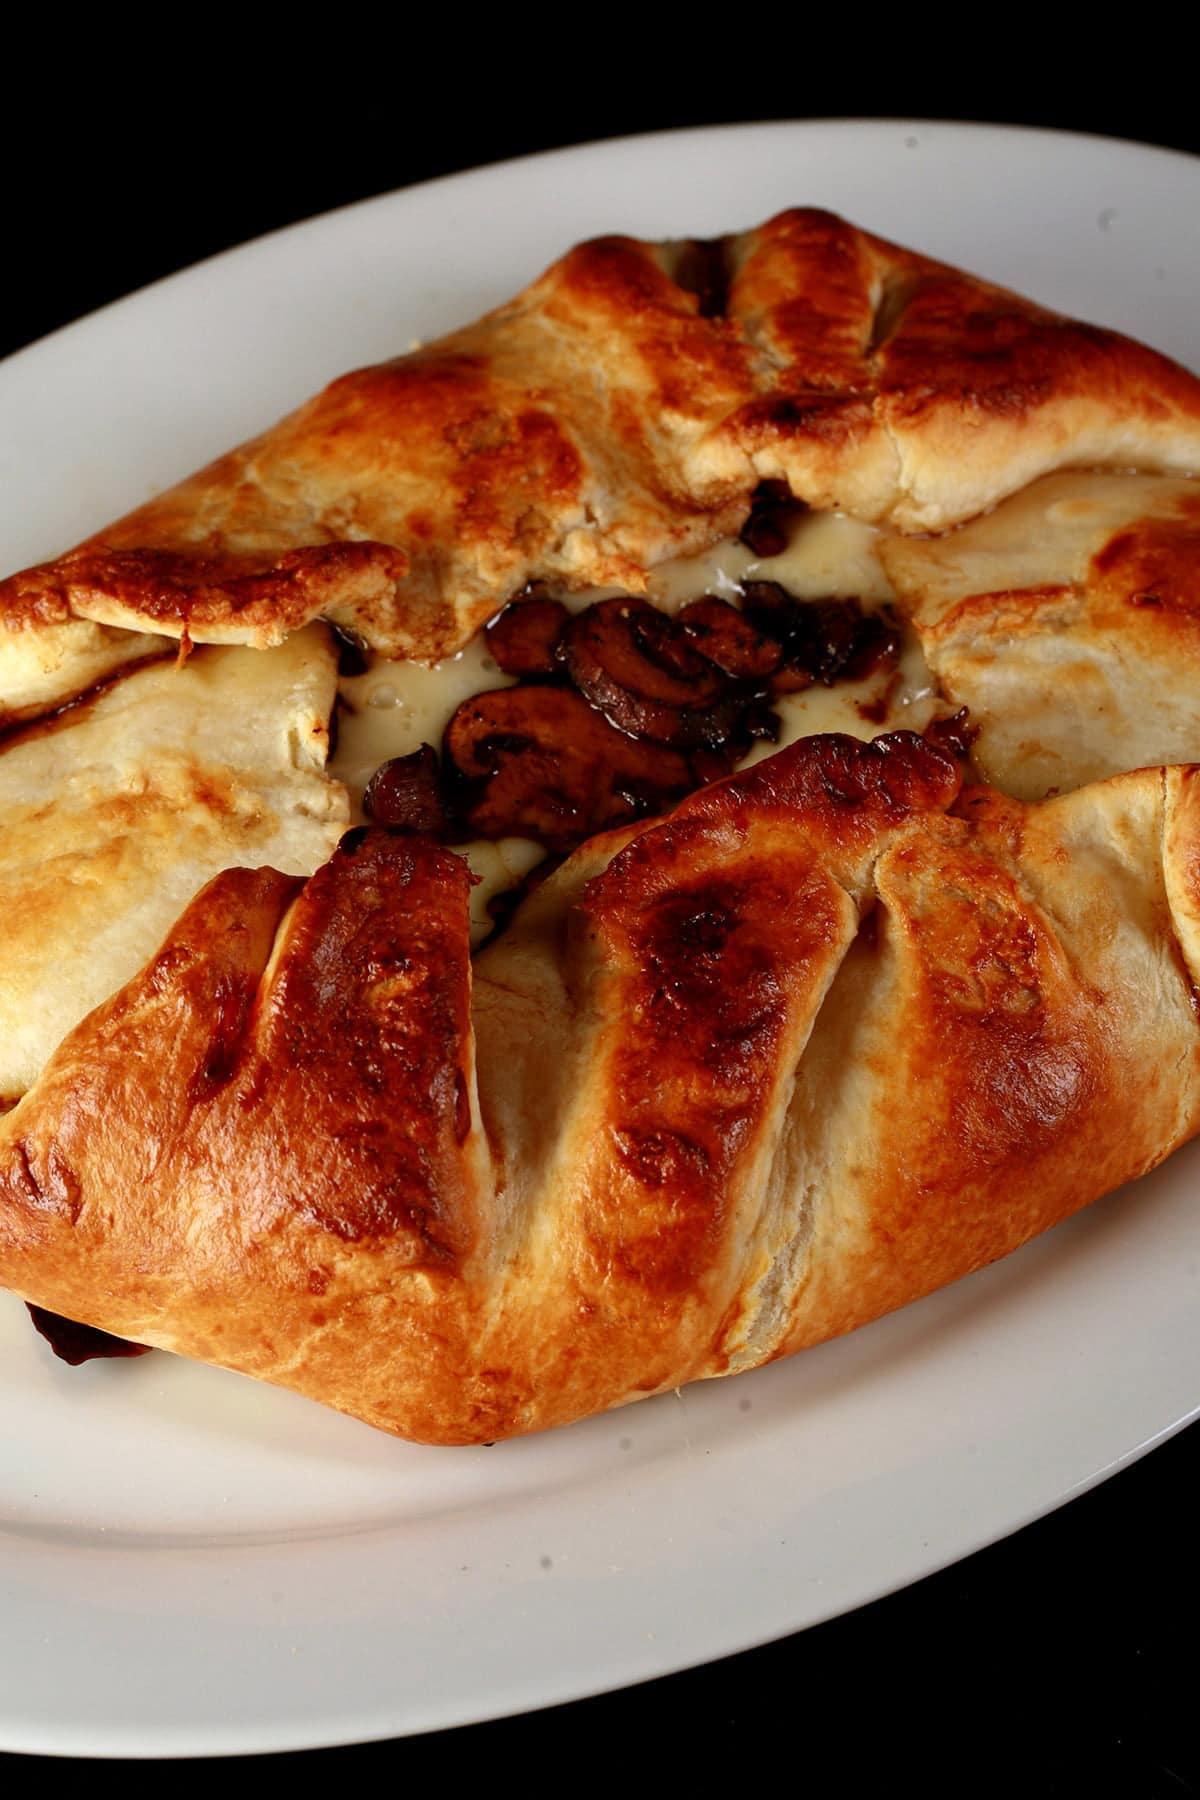 An oval shaped baked brie. Melted cheese and mushrooms are visible in the center.